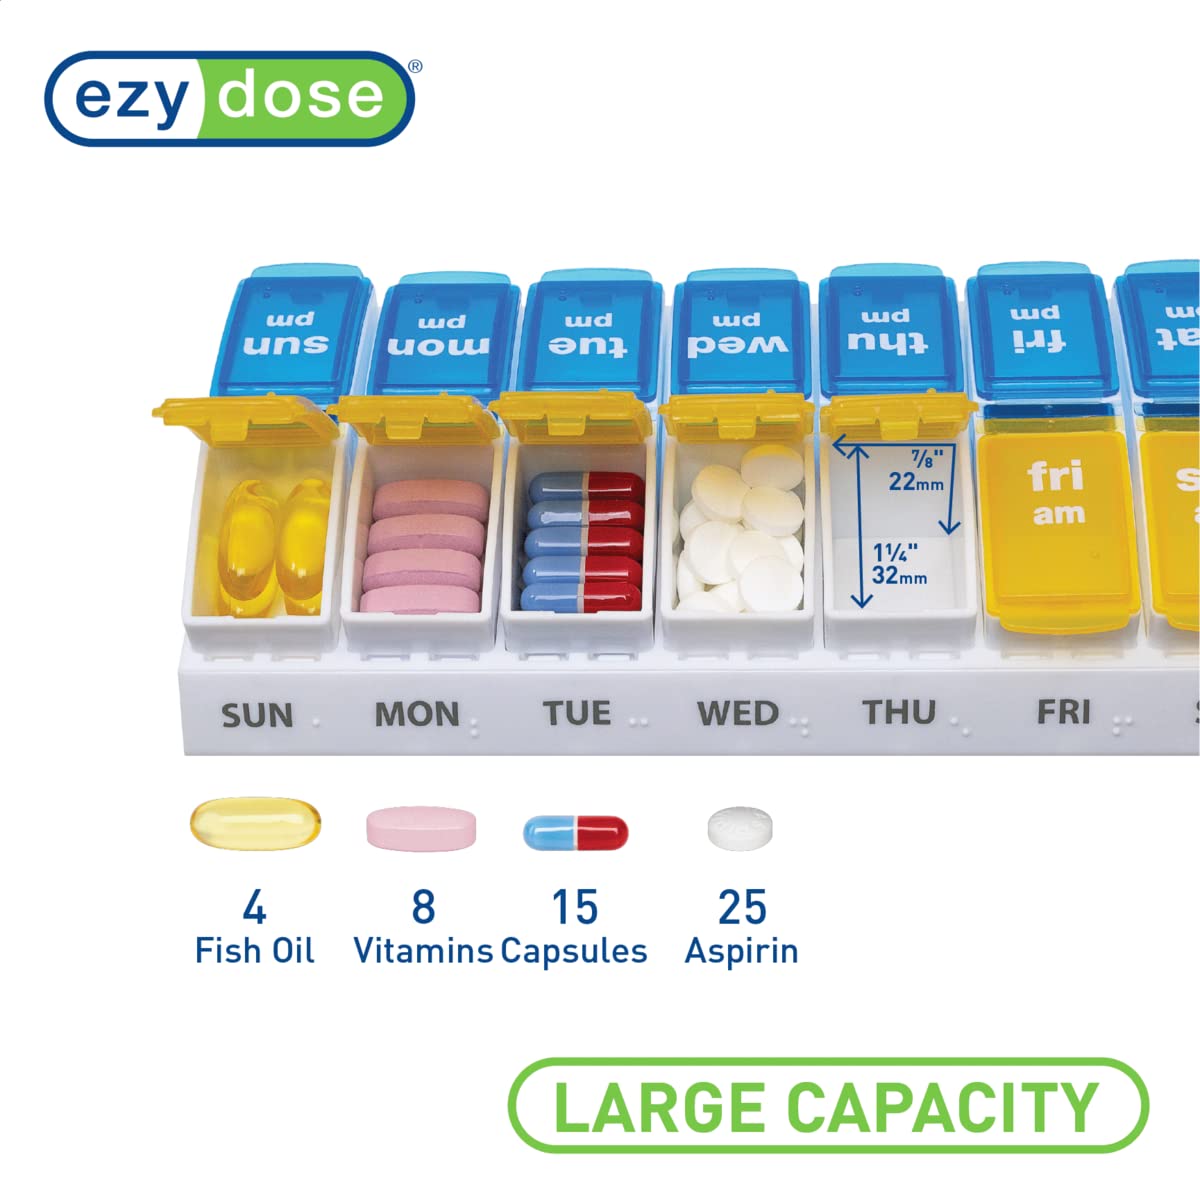 EZY DOSE Weekly (7-Day) AM/PM Pill Case, Medicine Planner, Vitamin Organizer, Large Pop-Out Compartments, 2 Times a Day, Blue and Yellow Lids